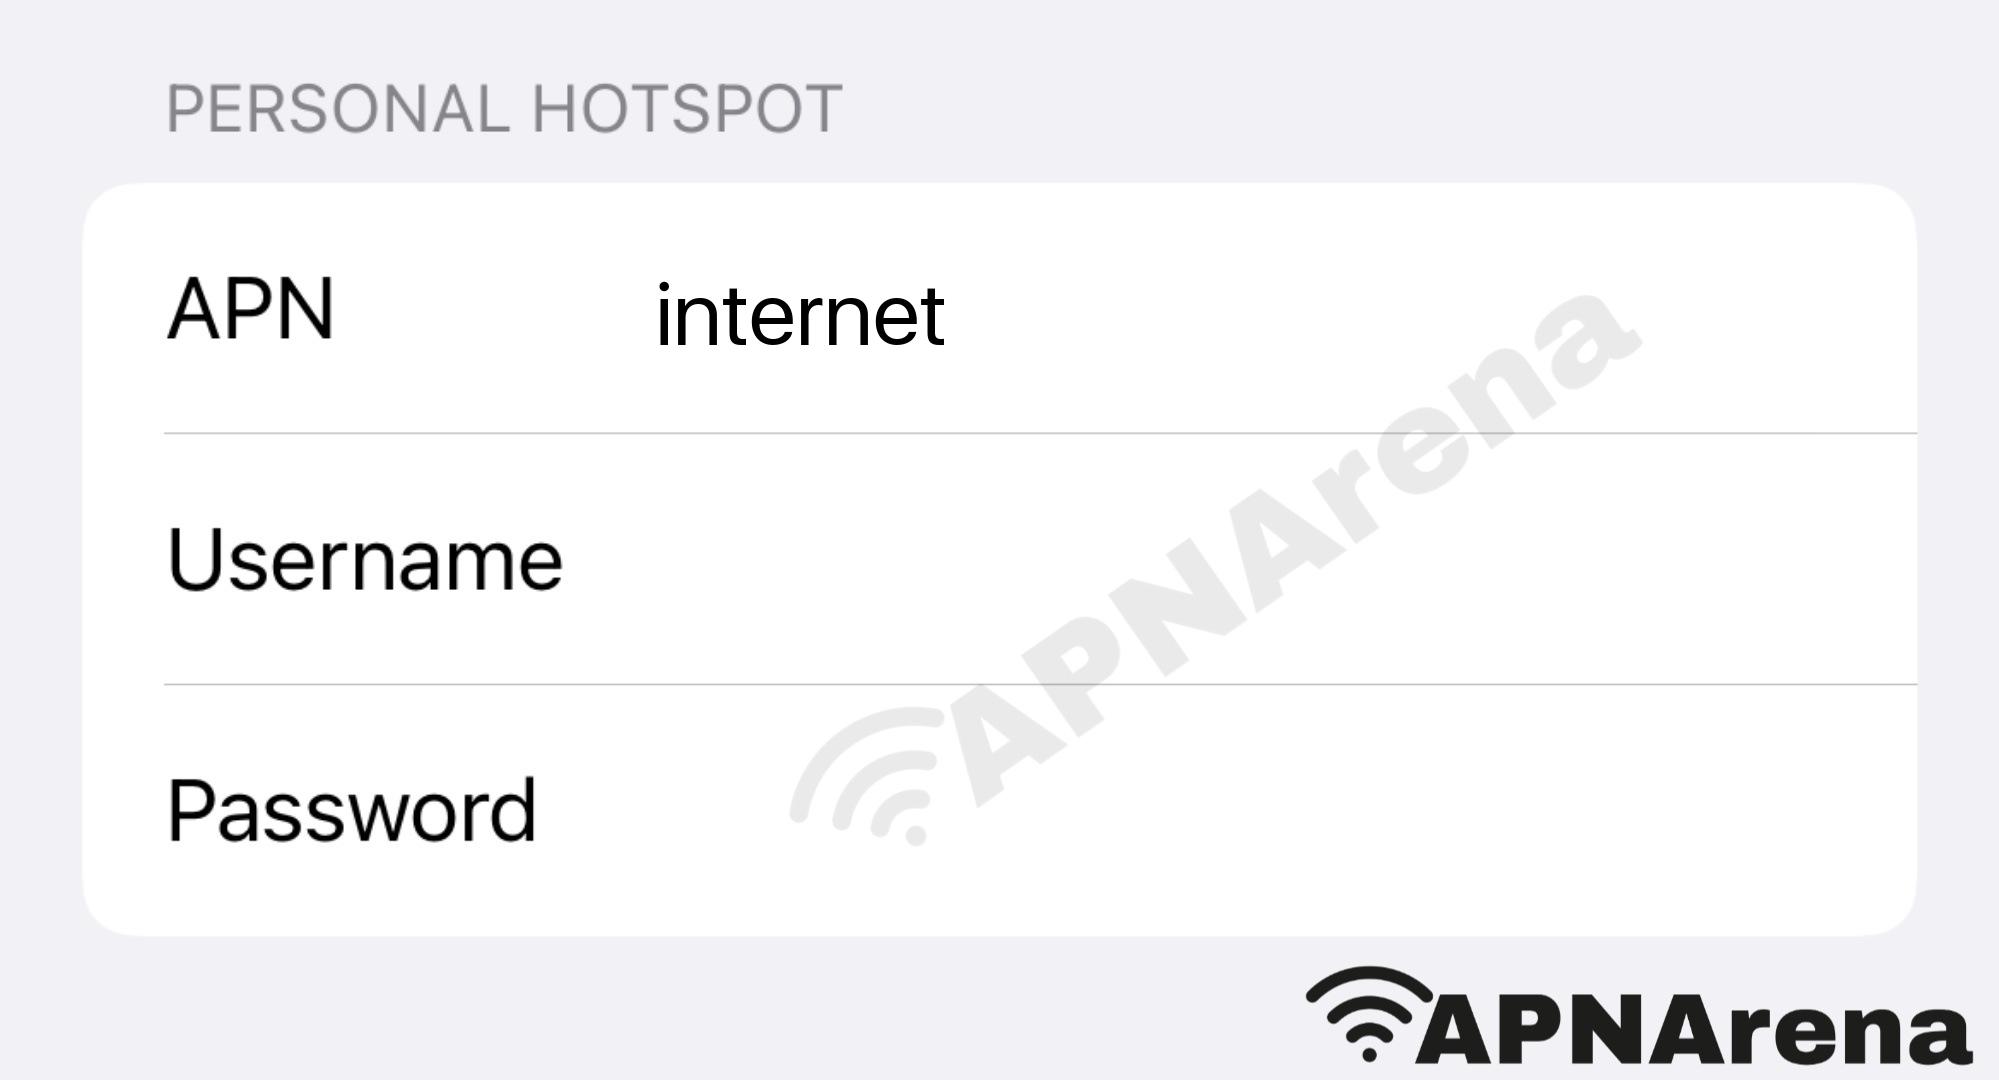 KORE Wireless Personal Hotspot Settings for iPhone